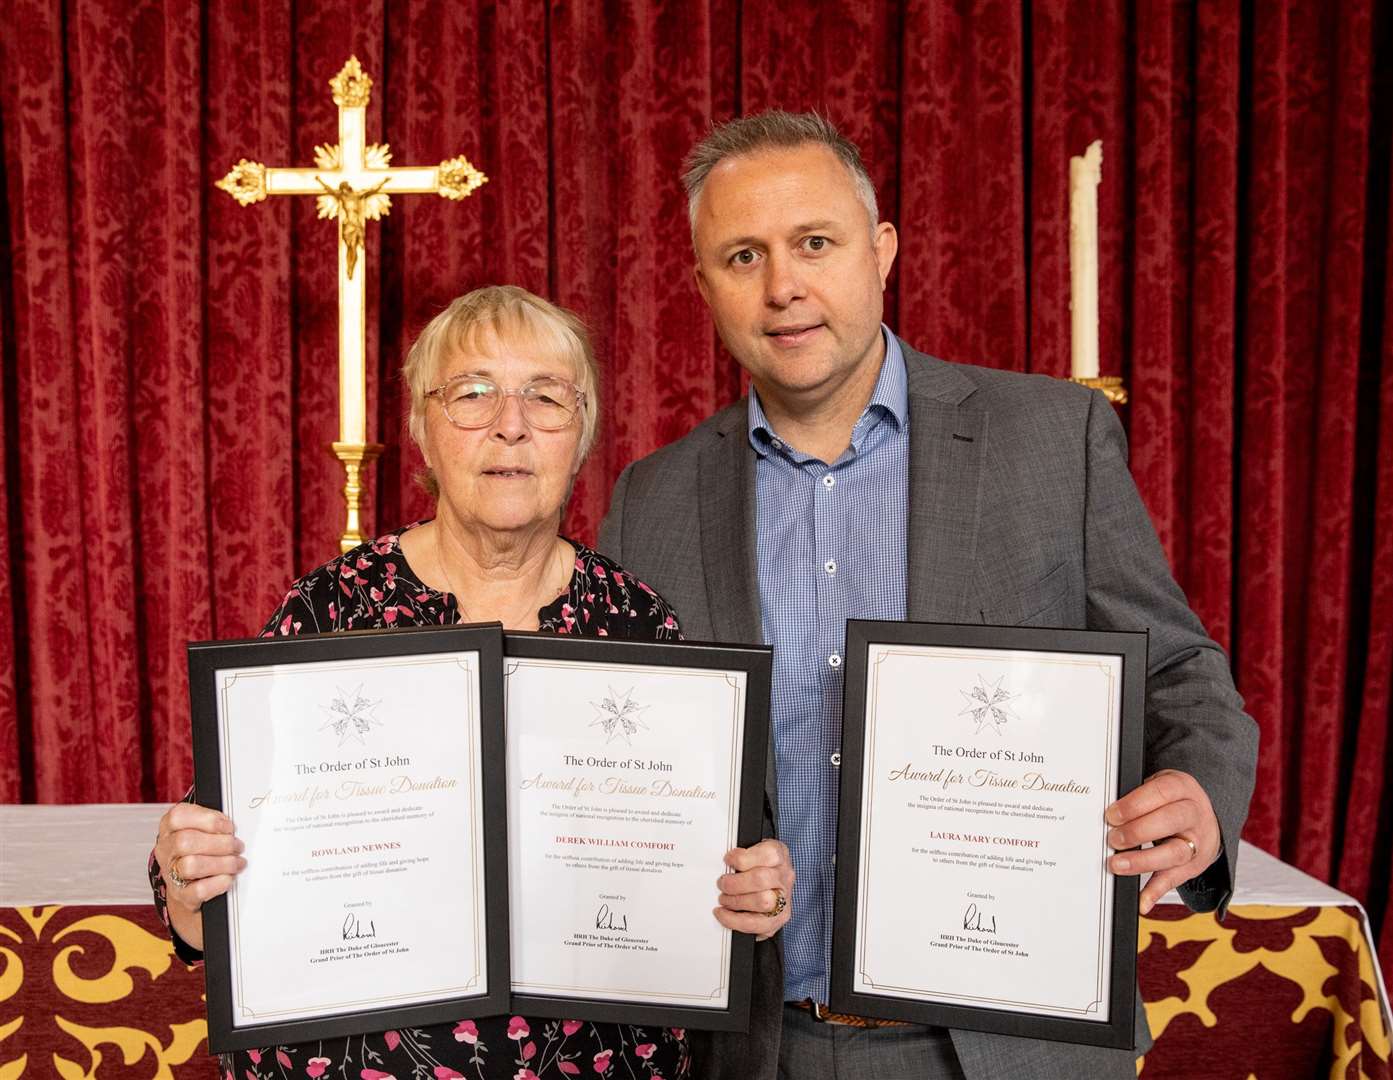 Diana Comfort with son Owain, receiving the awards on behalf of their lost loved ones. Picture: Diana Comfort